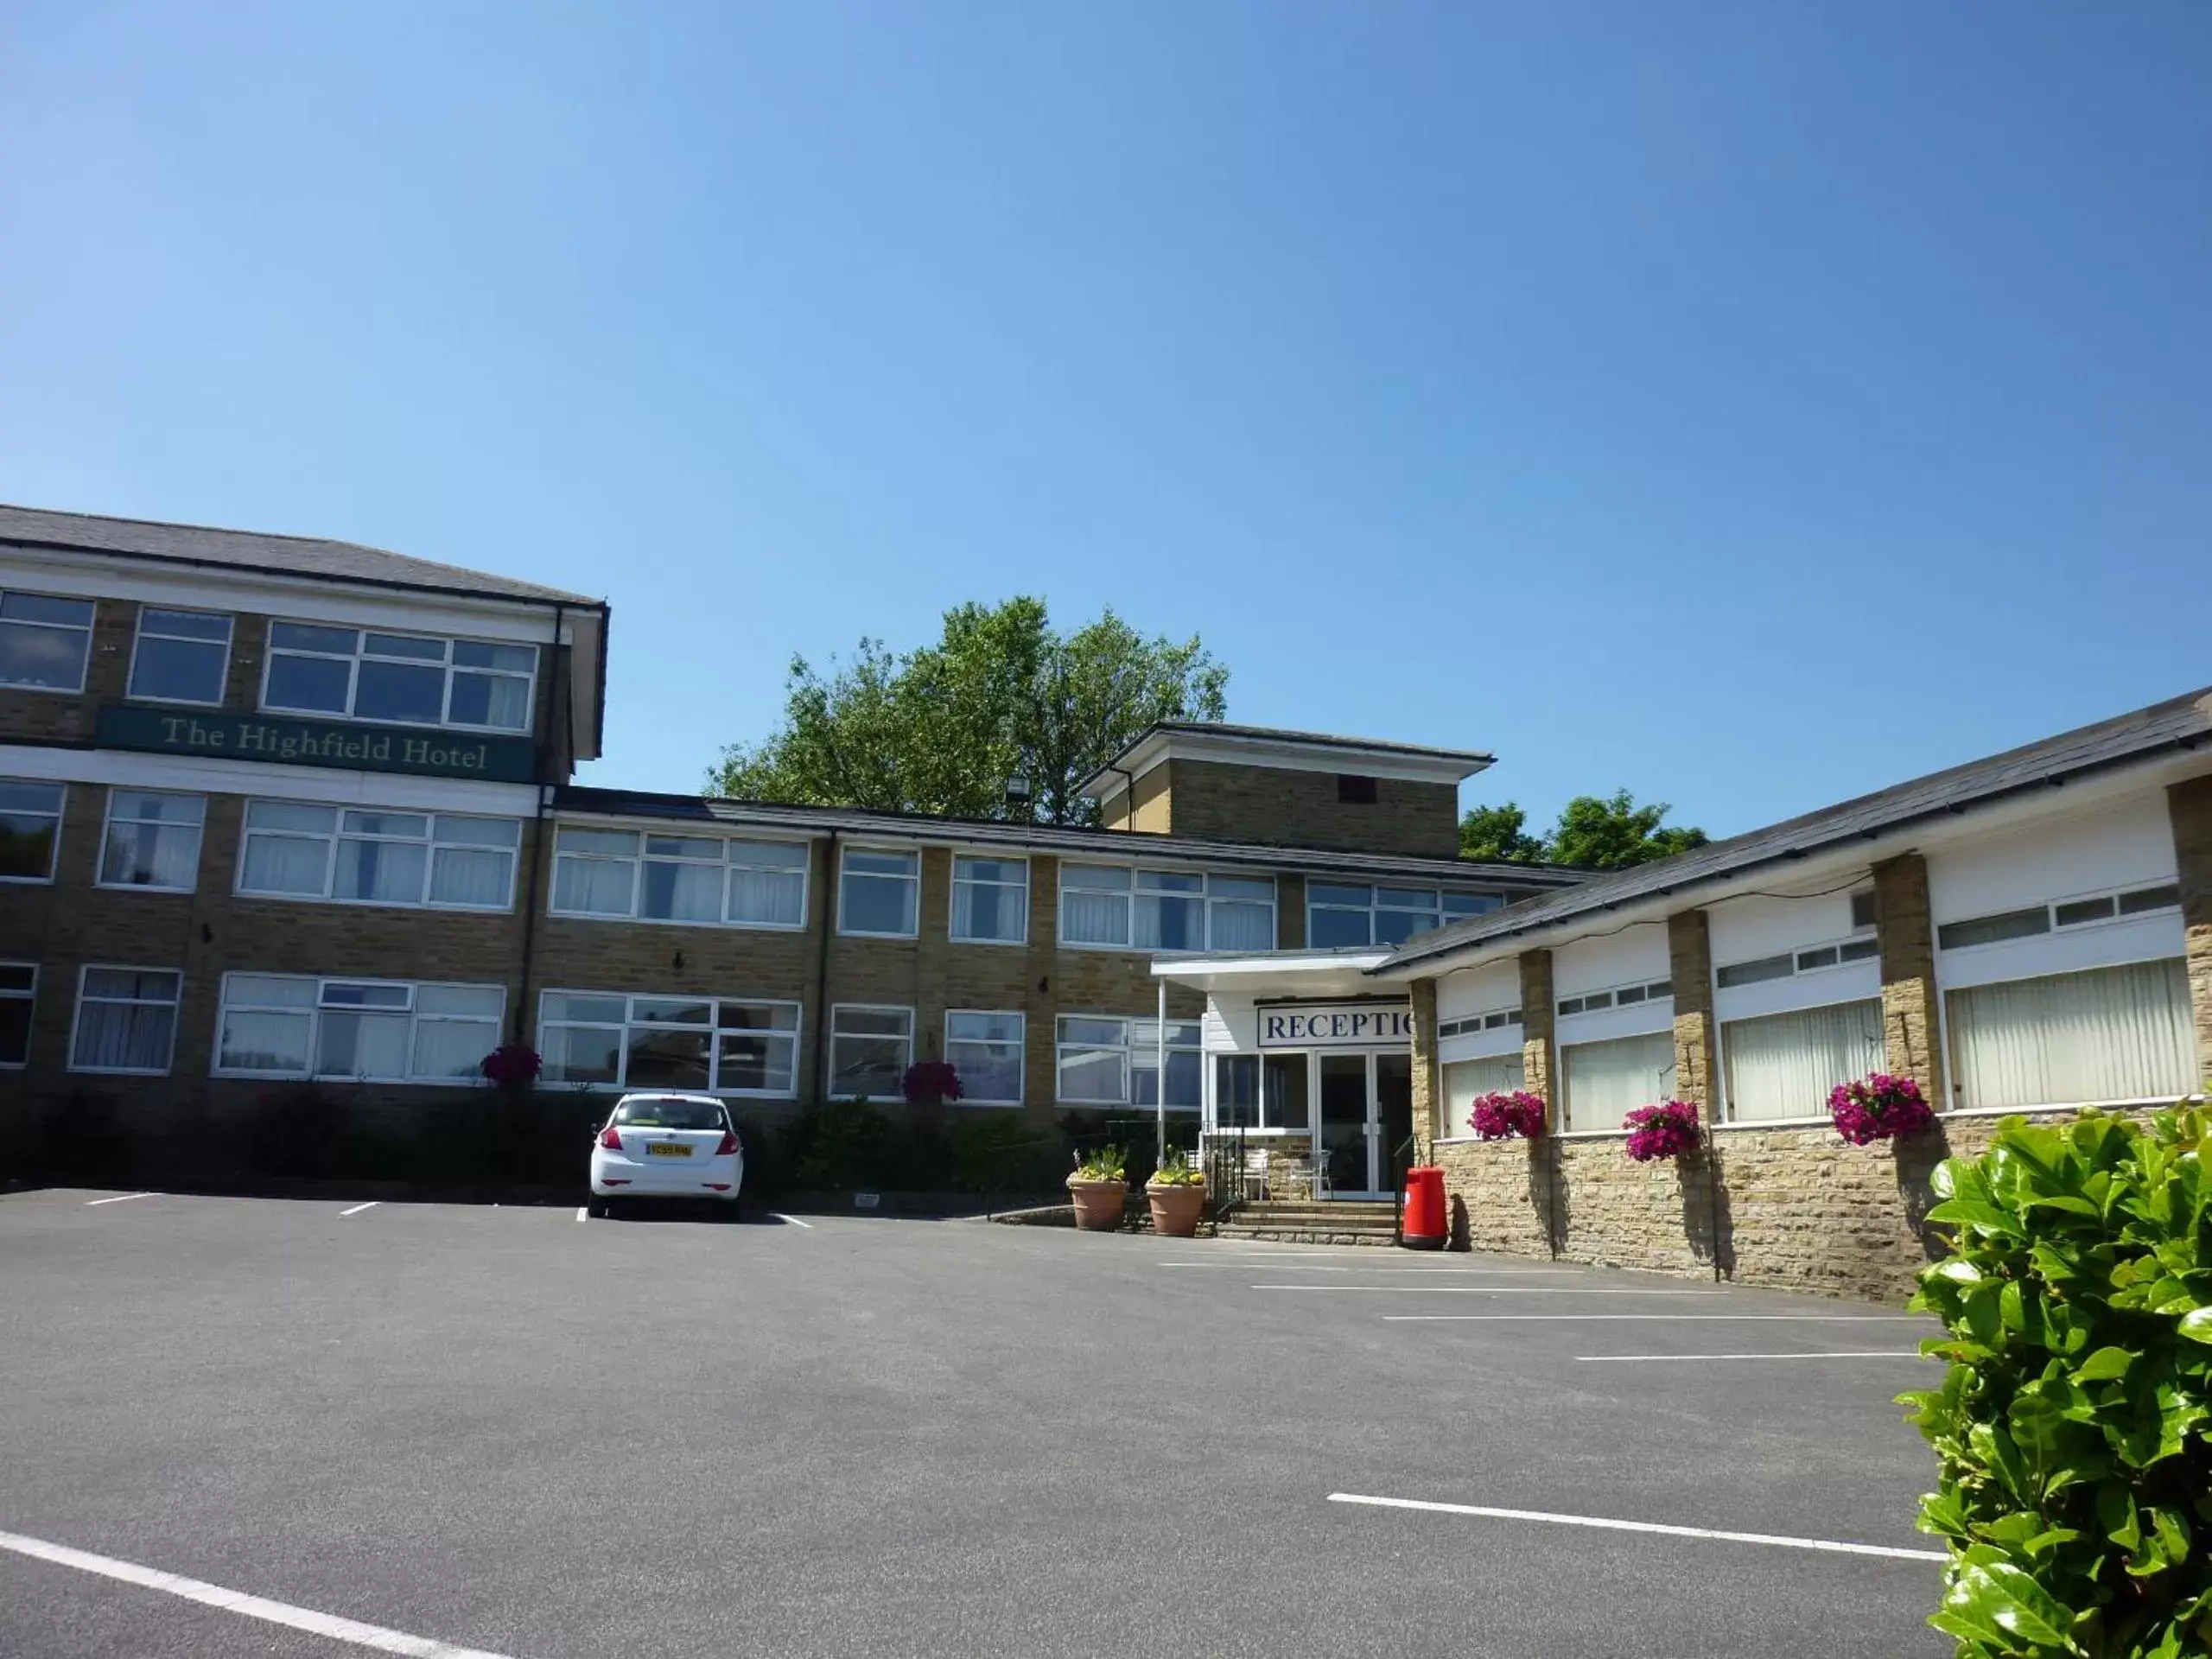 Property Building in The Highfield Hotel